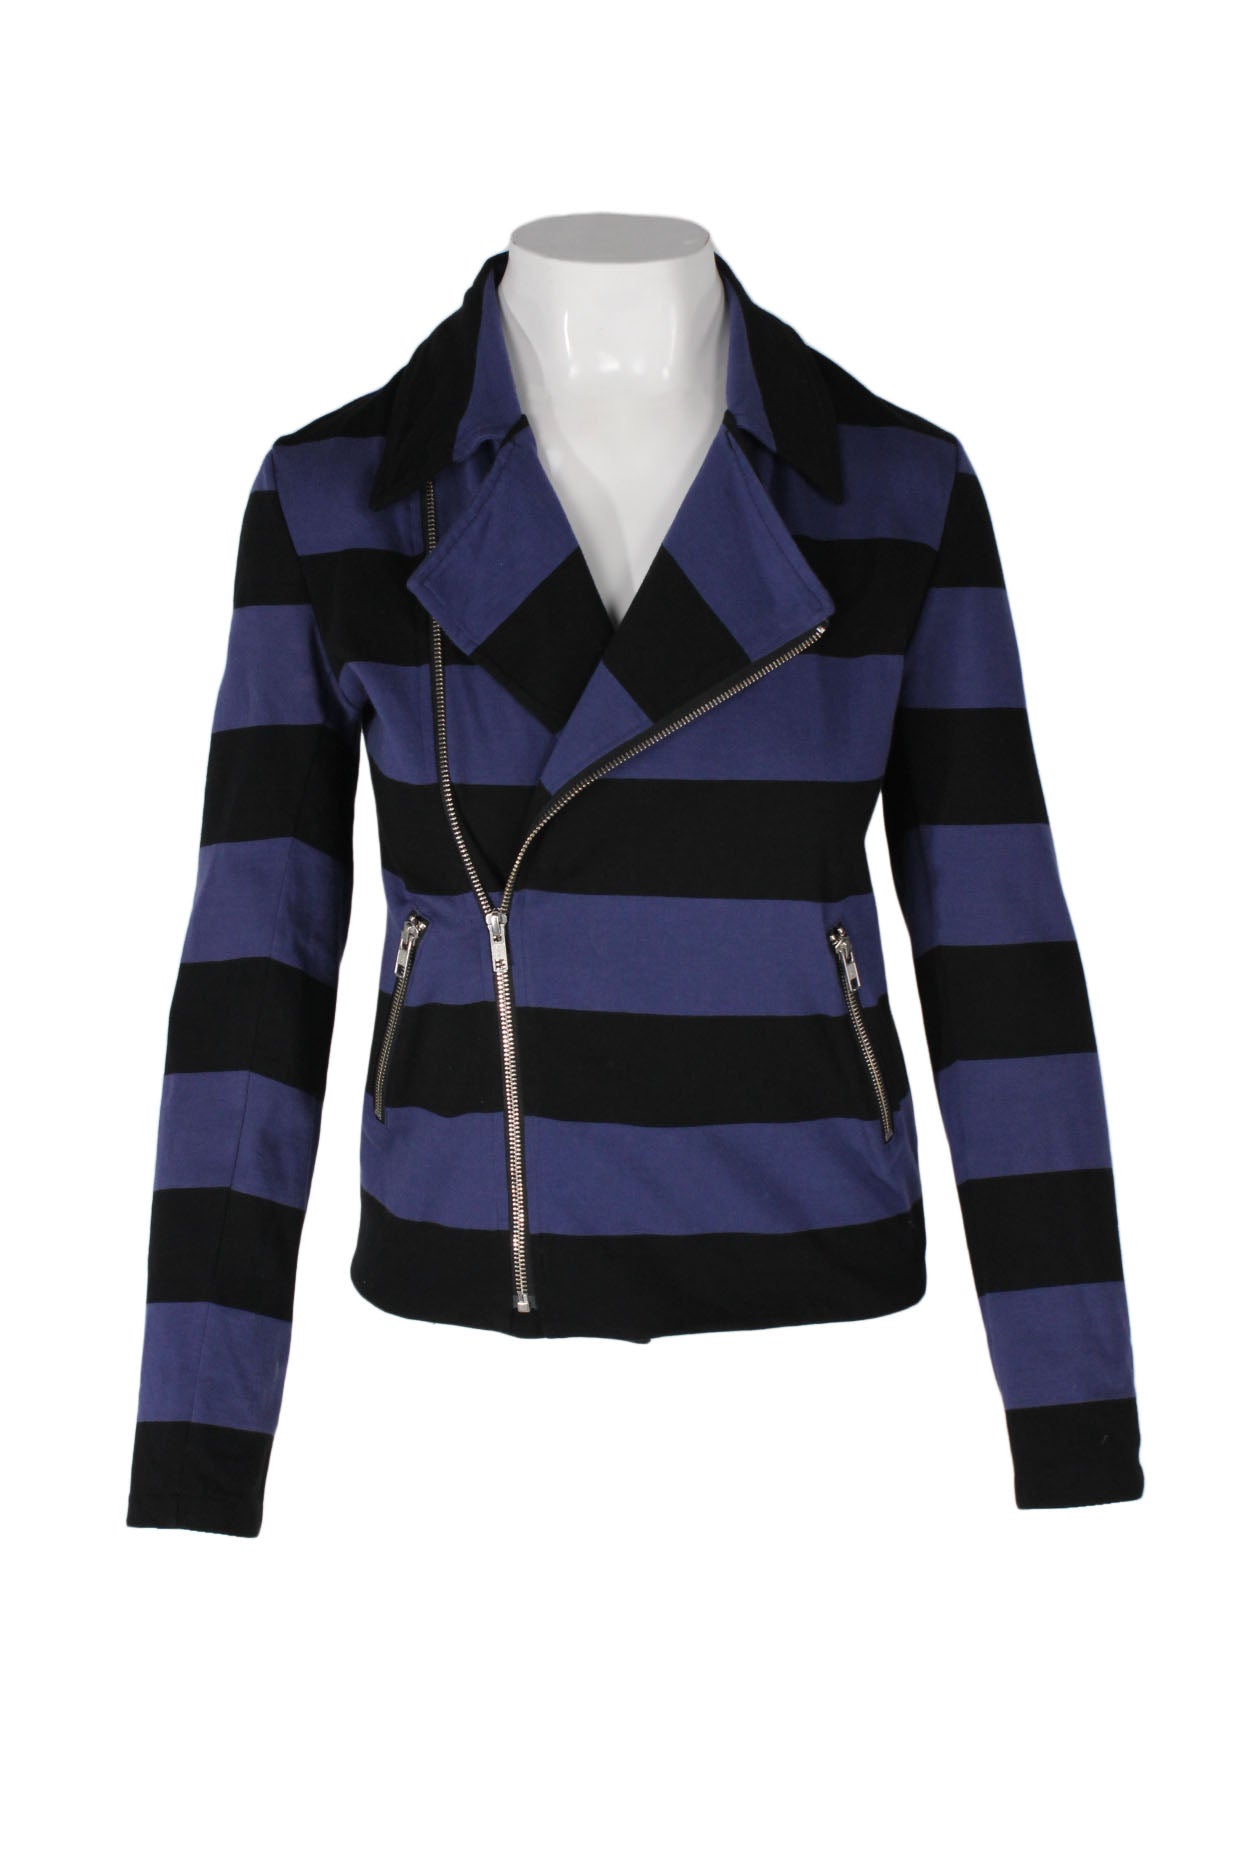 front angle agnes b. x opening ceremony black and purple lightweight striped jacket on feminine mannequin torso featuring a notched/convertible collar, diagonal zip pockets, and asymmetrical front zip closure.